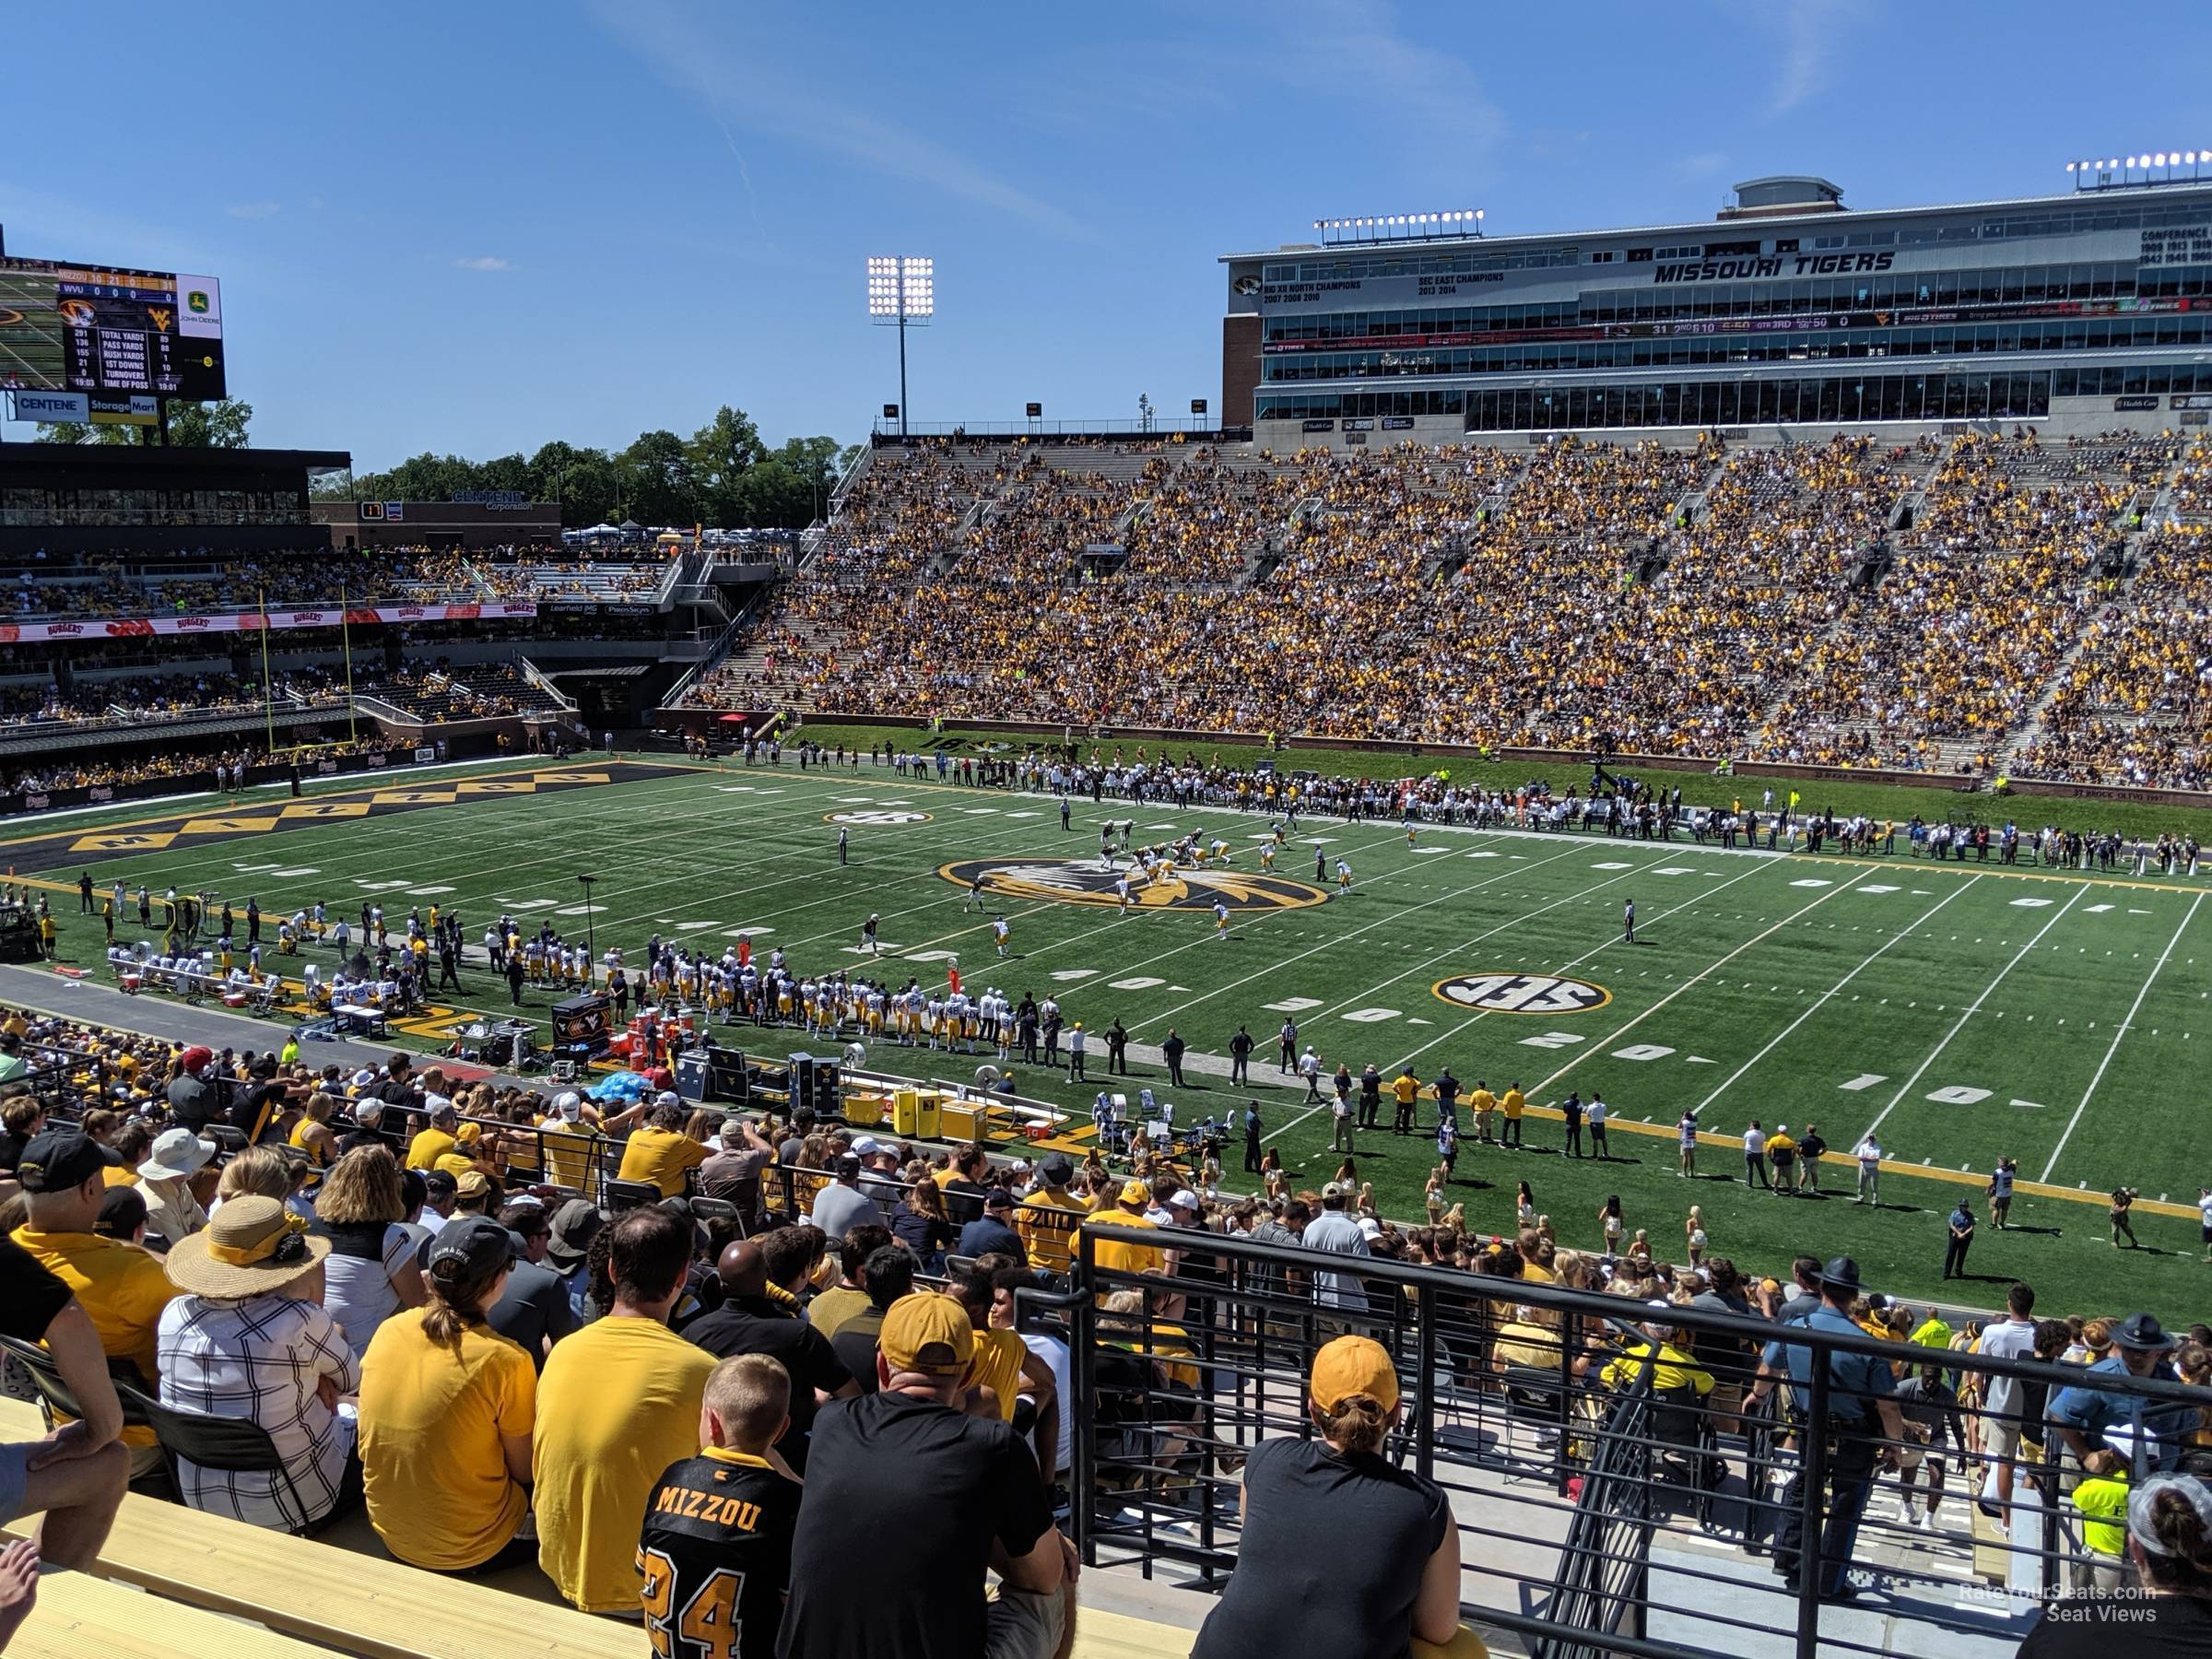 section 109, row 54 seat view  - faurot field